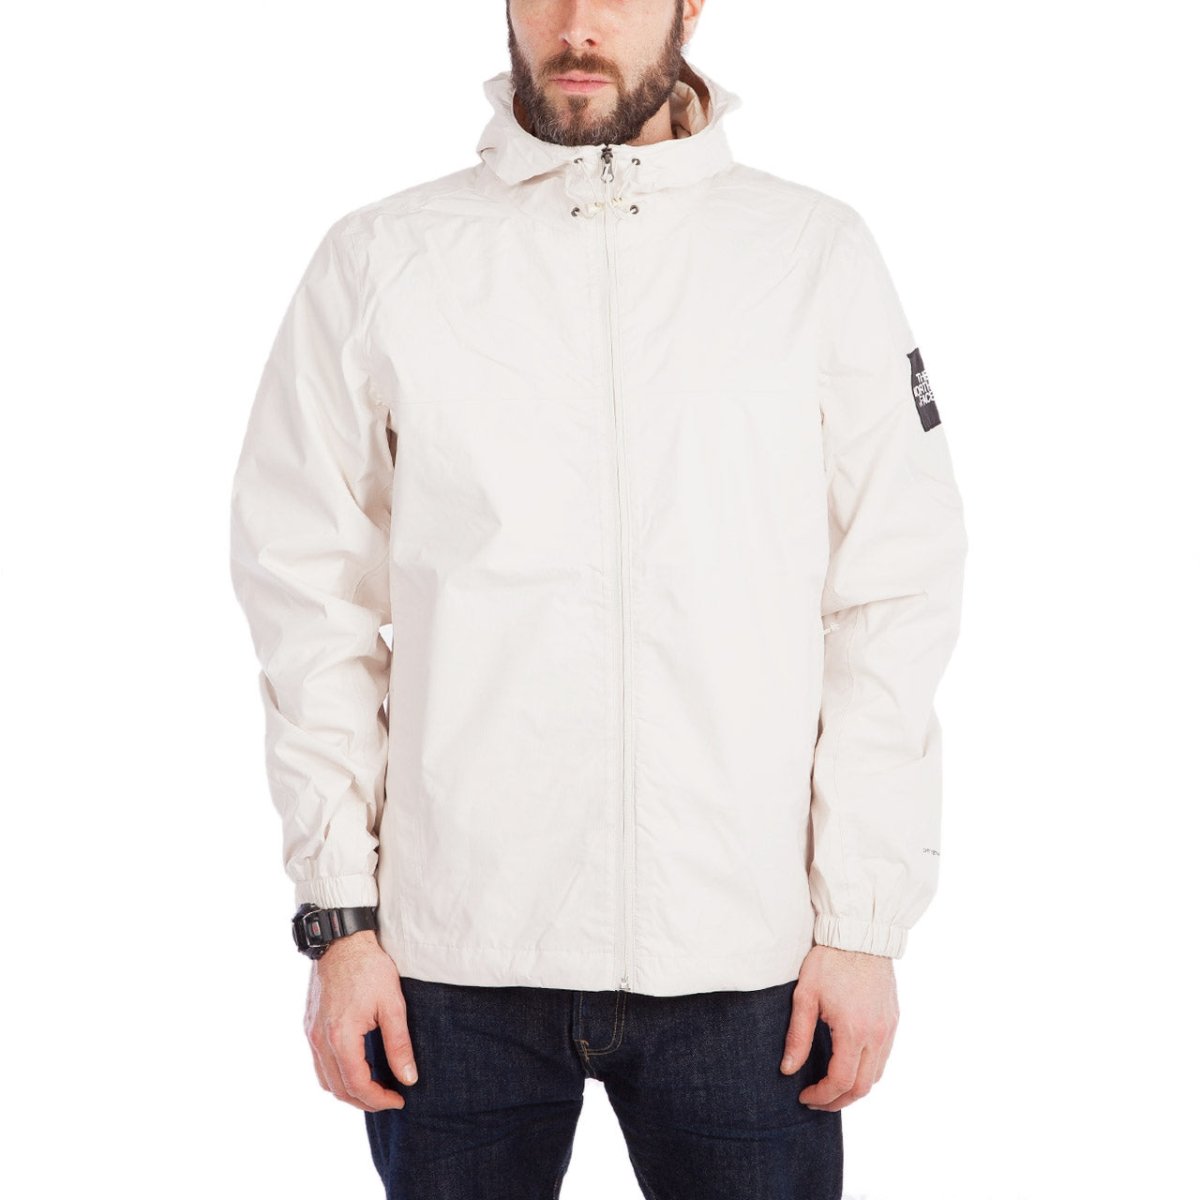 The North Face Mountain Q Jacket (Vintage Weiß)  - Allike Store